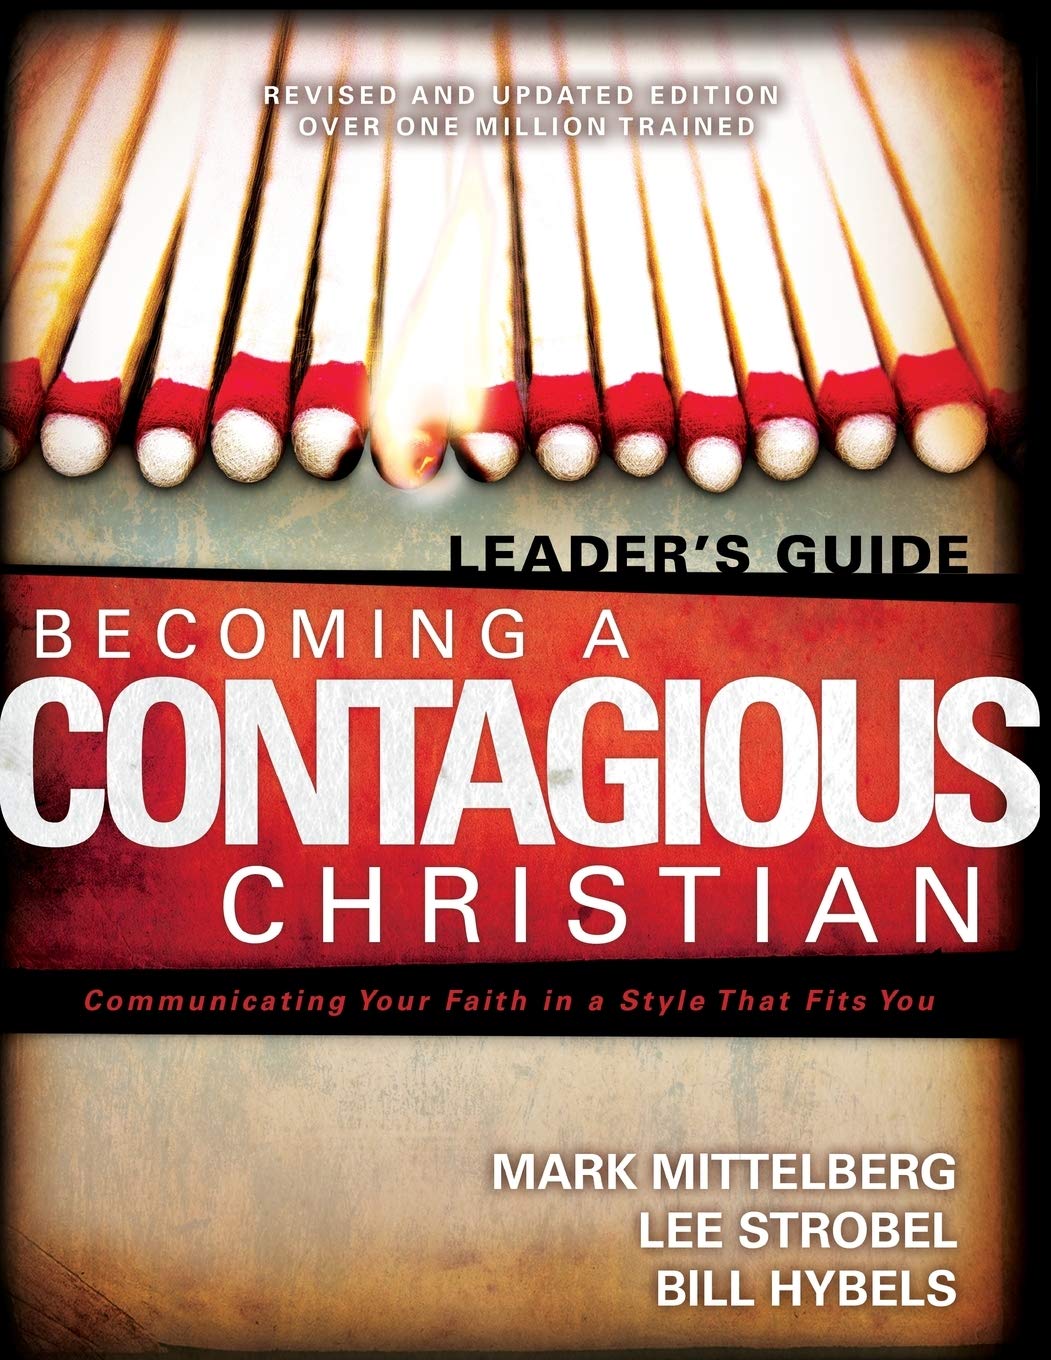 Becoming a Contagious Christian Leaders Guide: Communicating Your Faith in a Style That Fits You